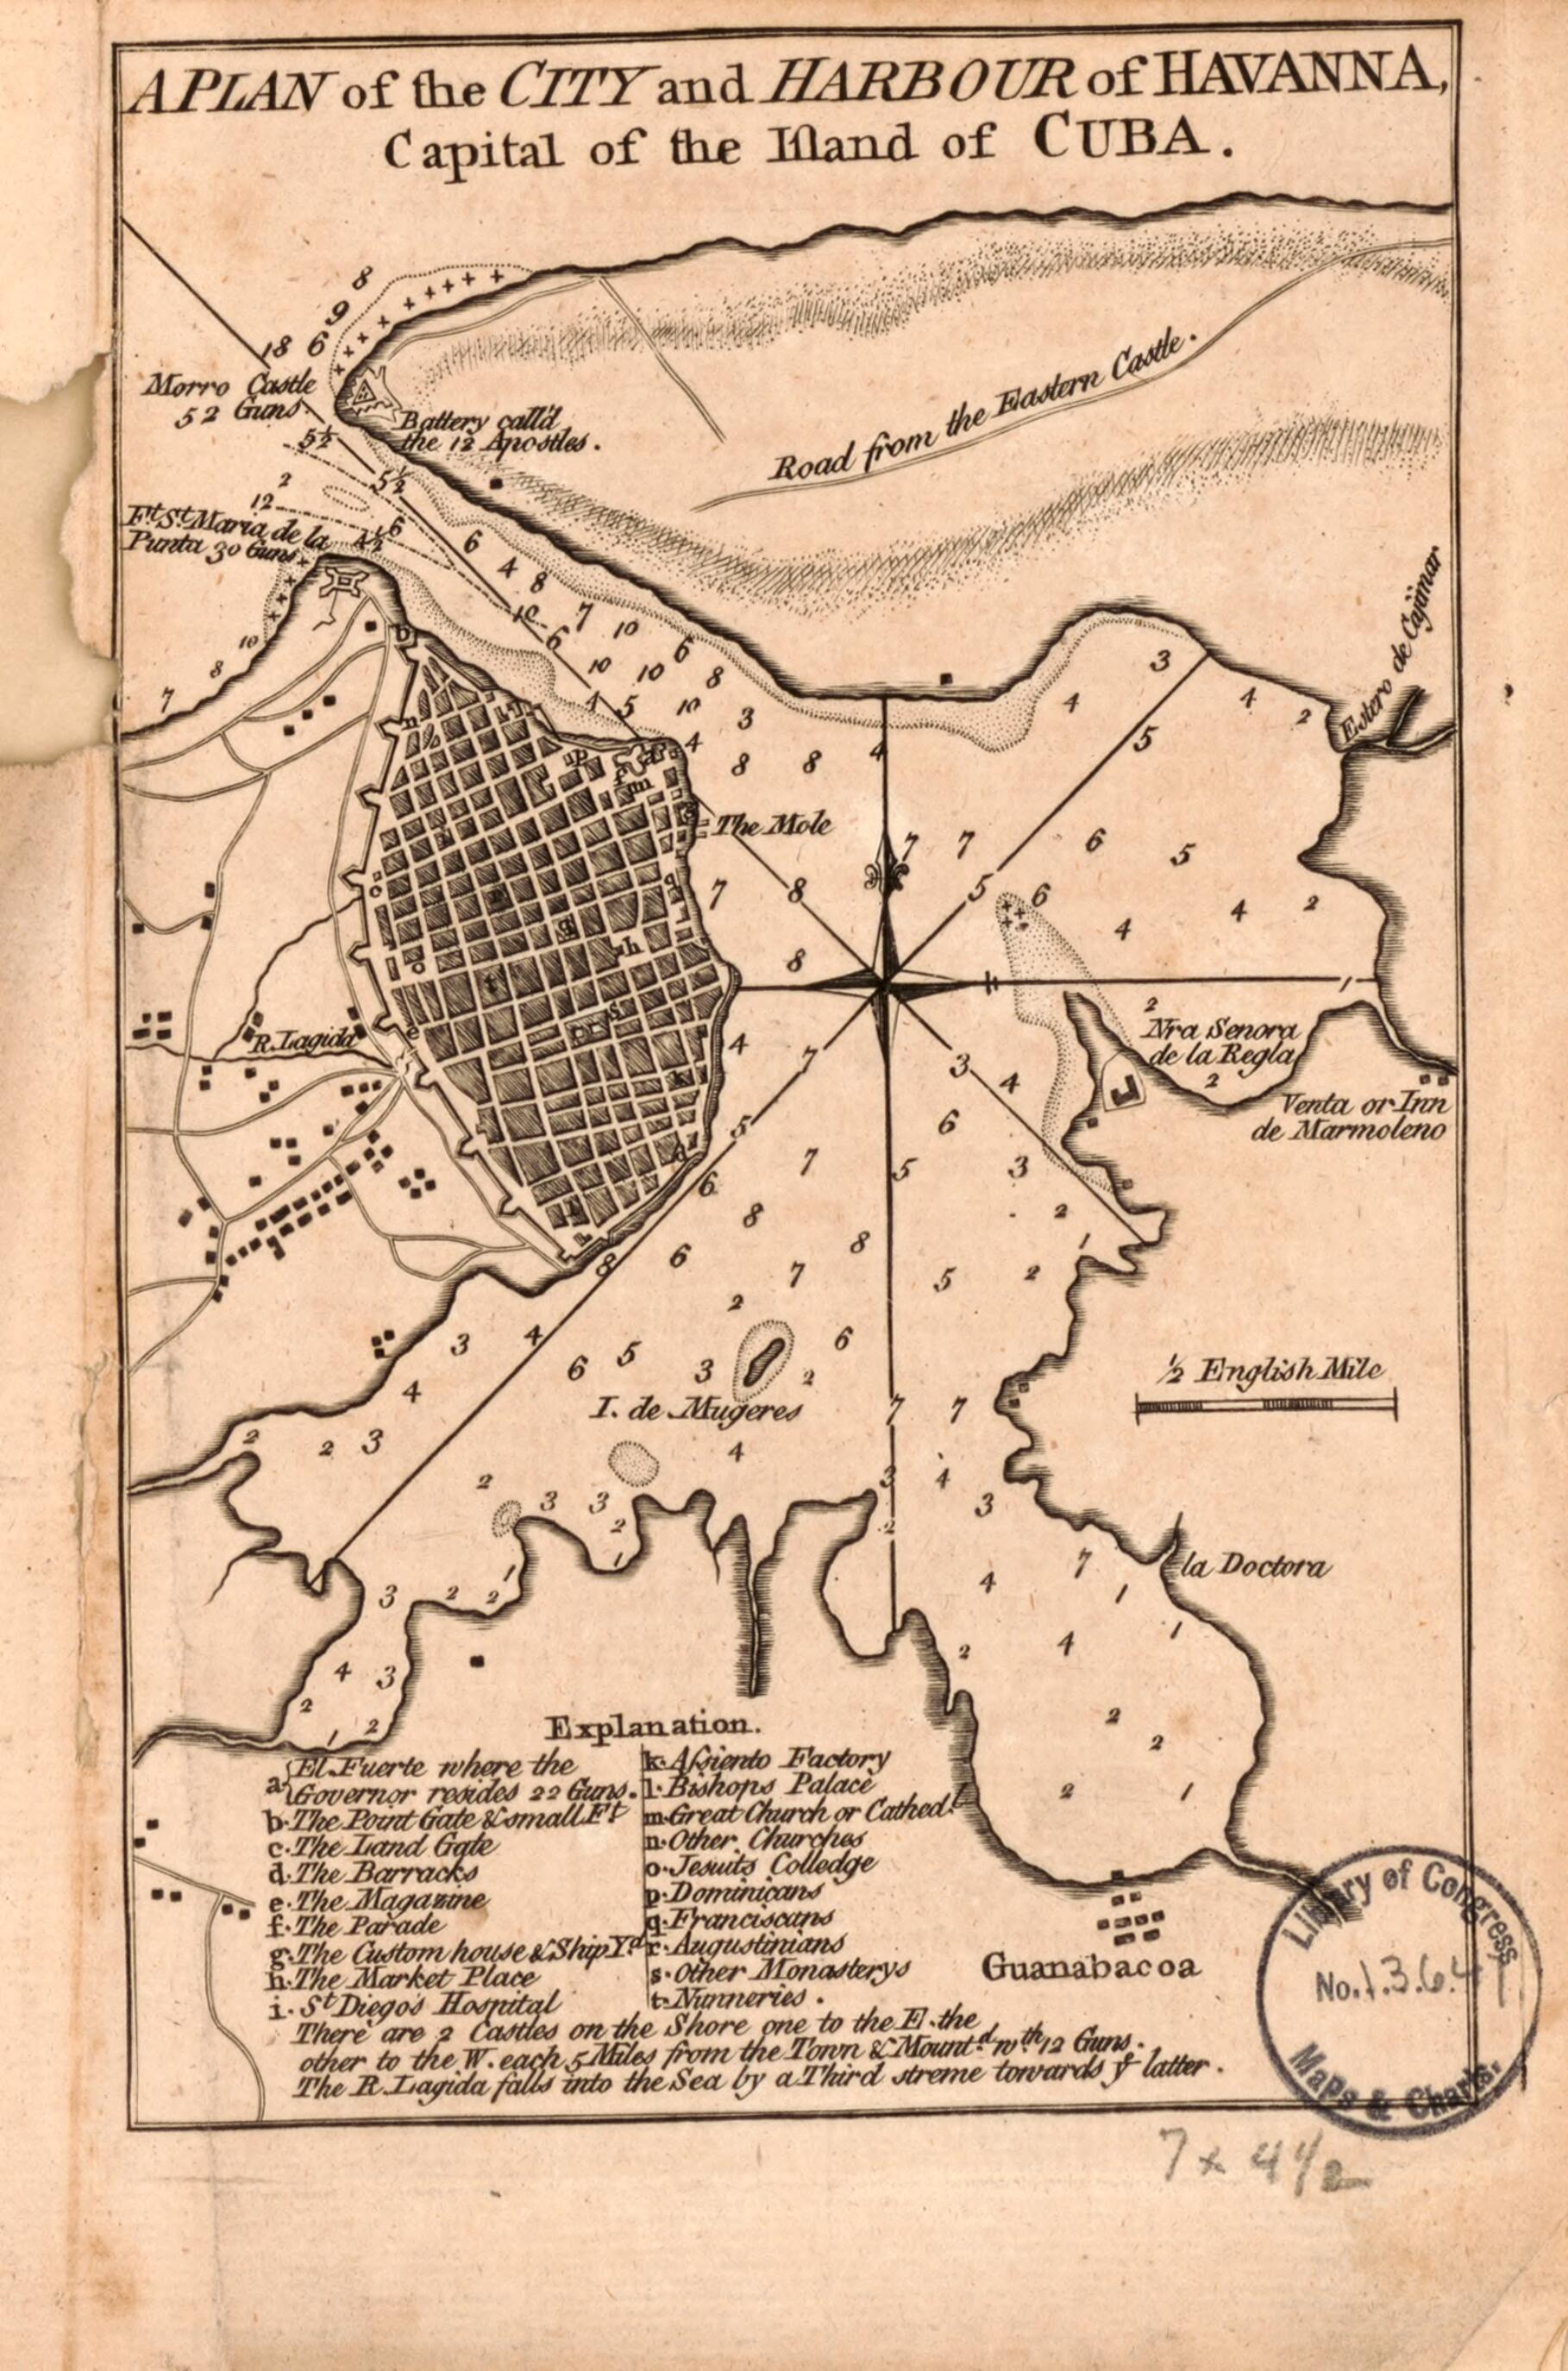 This old map of A Plan of the City and Harbour of Havanna, Capital of the Island of Cuba from 1762 was created by  in 1762